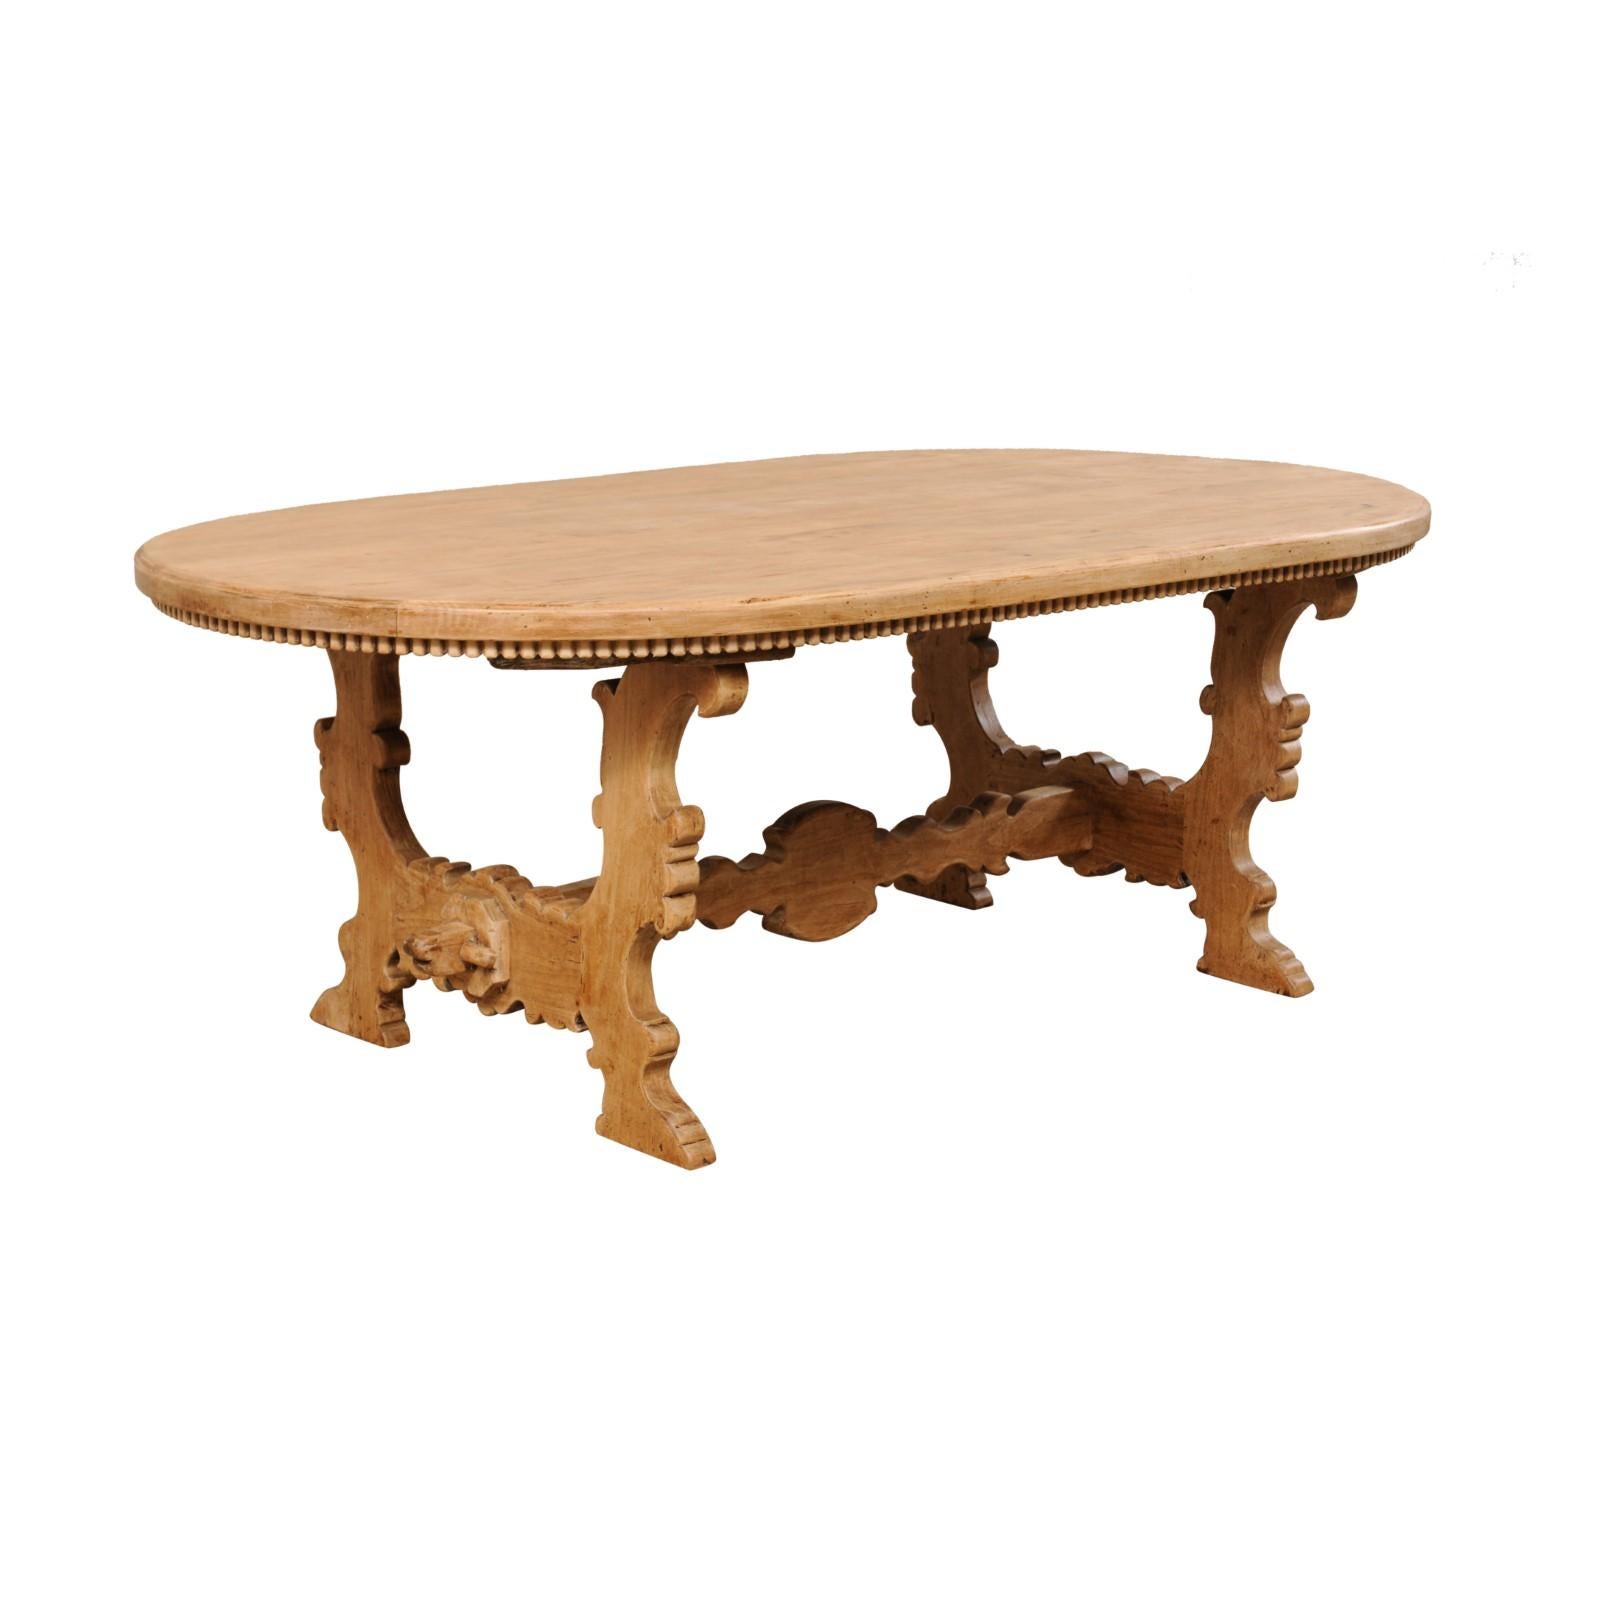 7 Ft. Long Oval Trestle Bleached-Wood Dining Table w/ Beautiful Carvings & Trim 